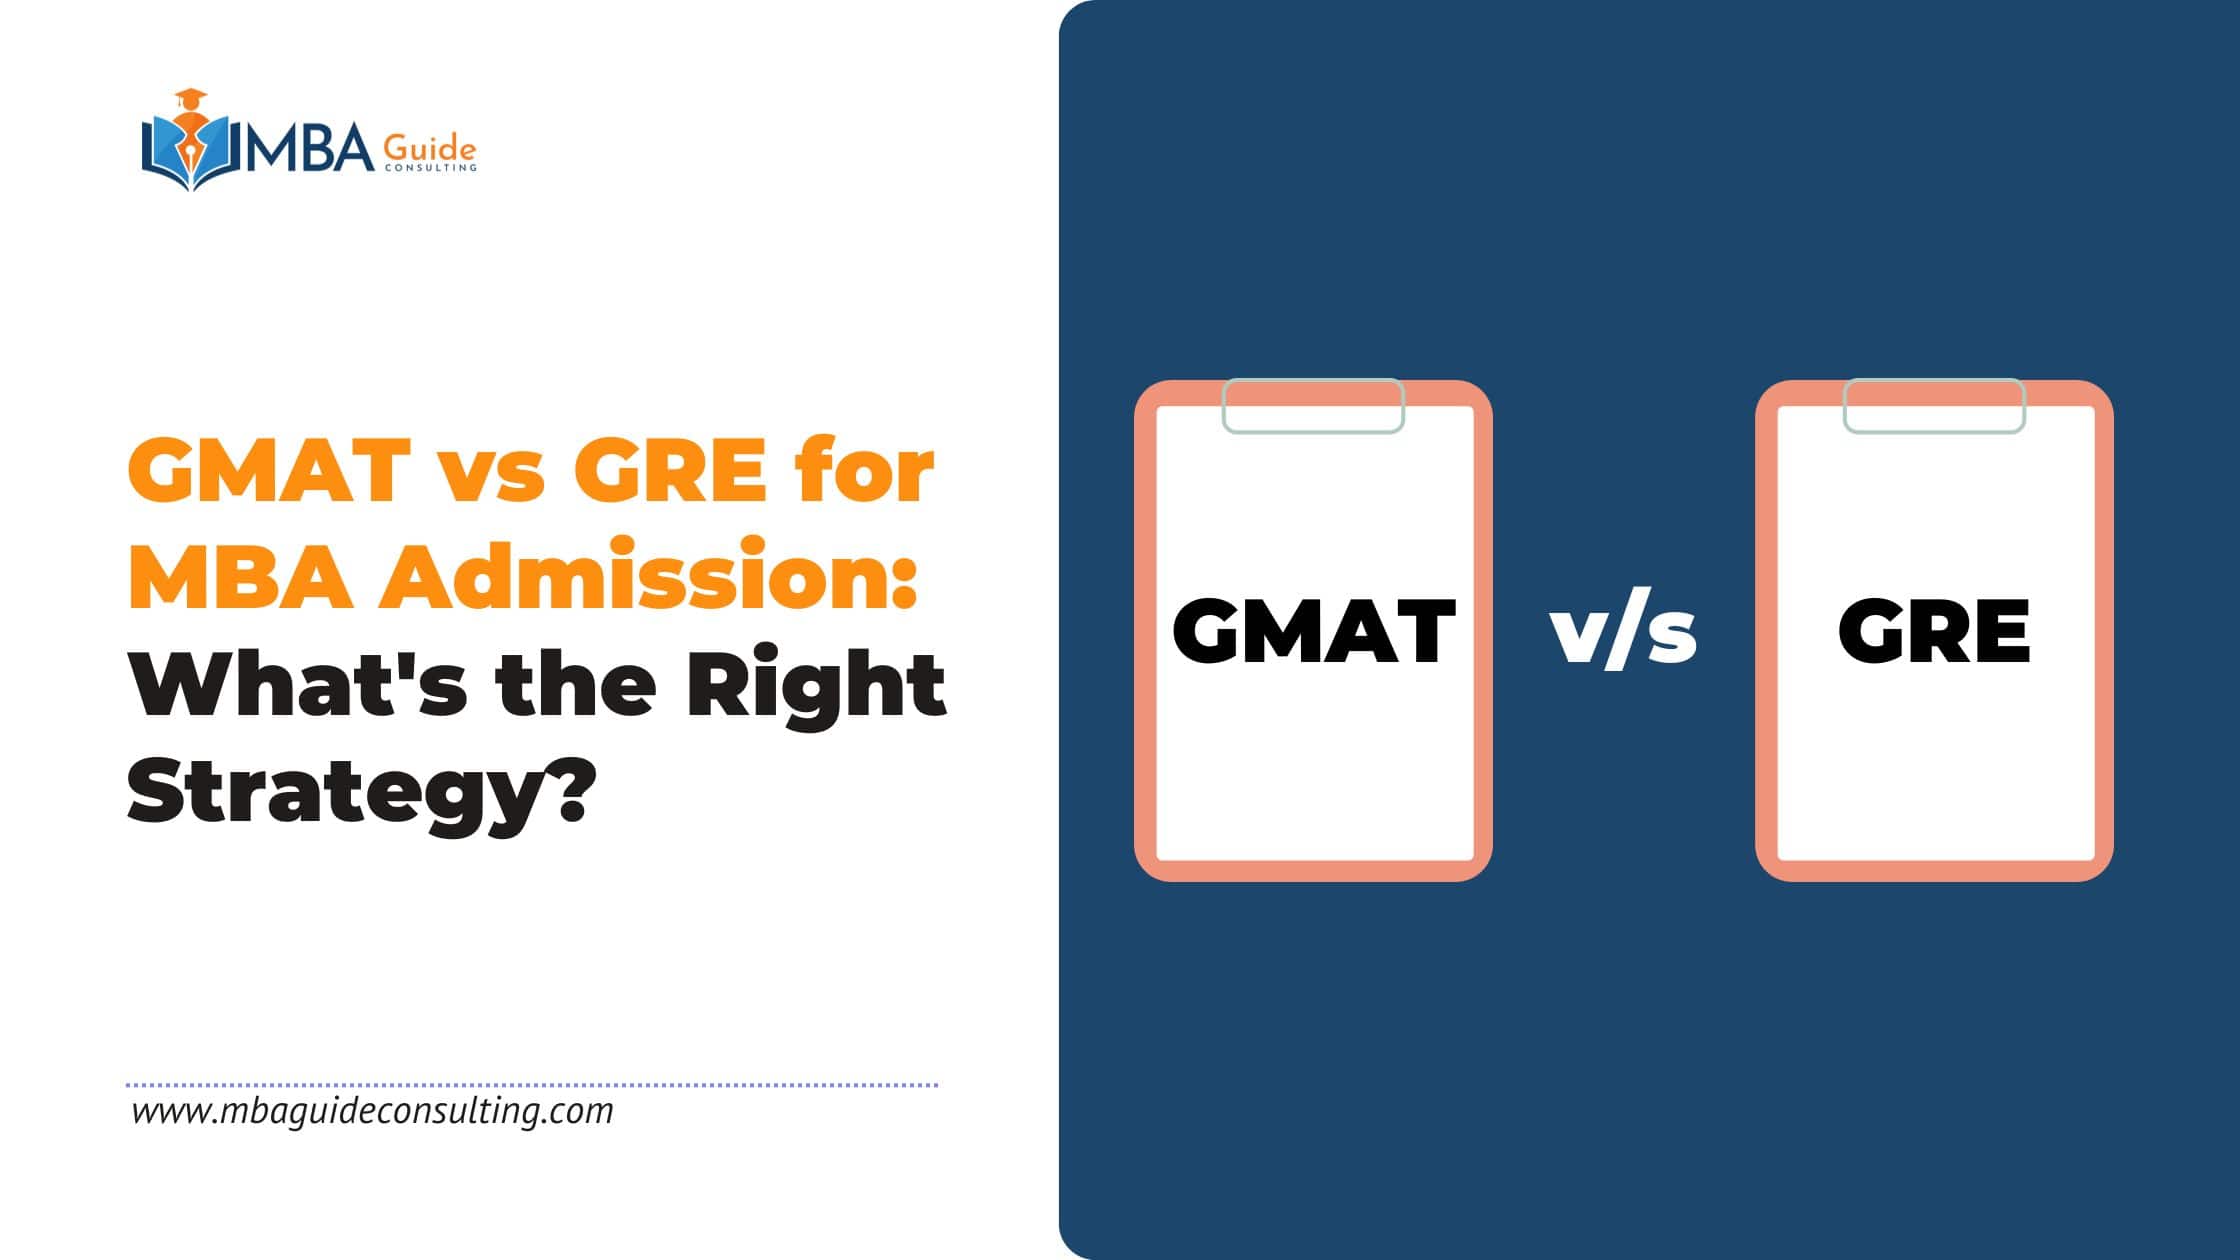 GMAT vs GRE for MBA Admission: What’s the Right Strategy?